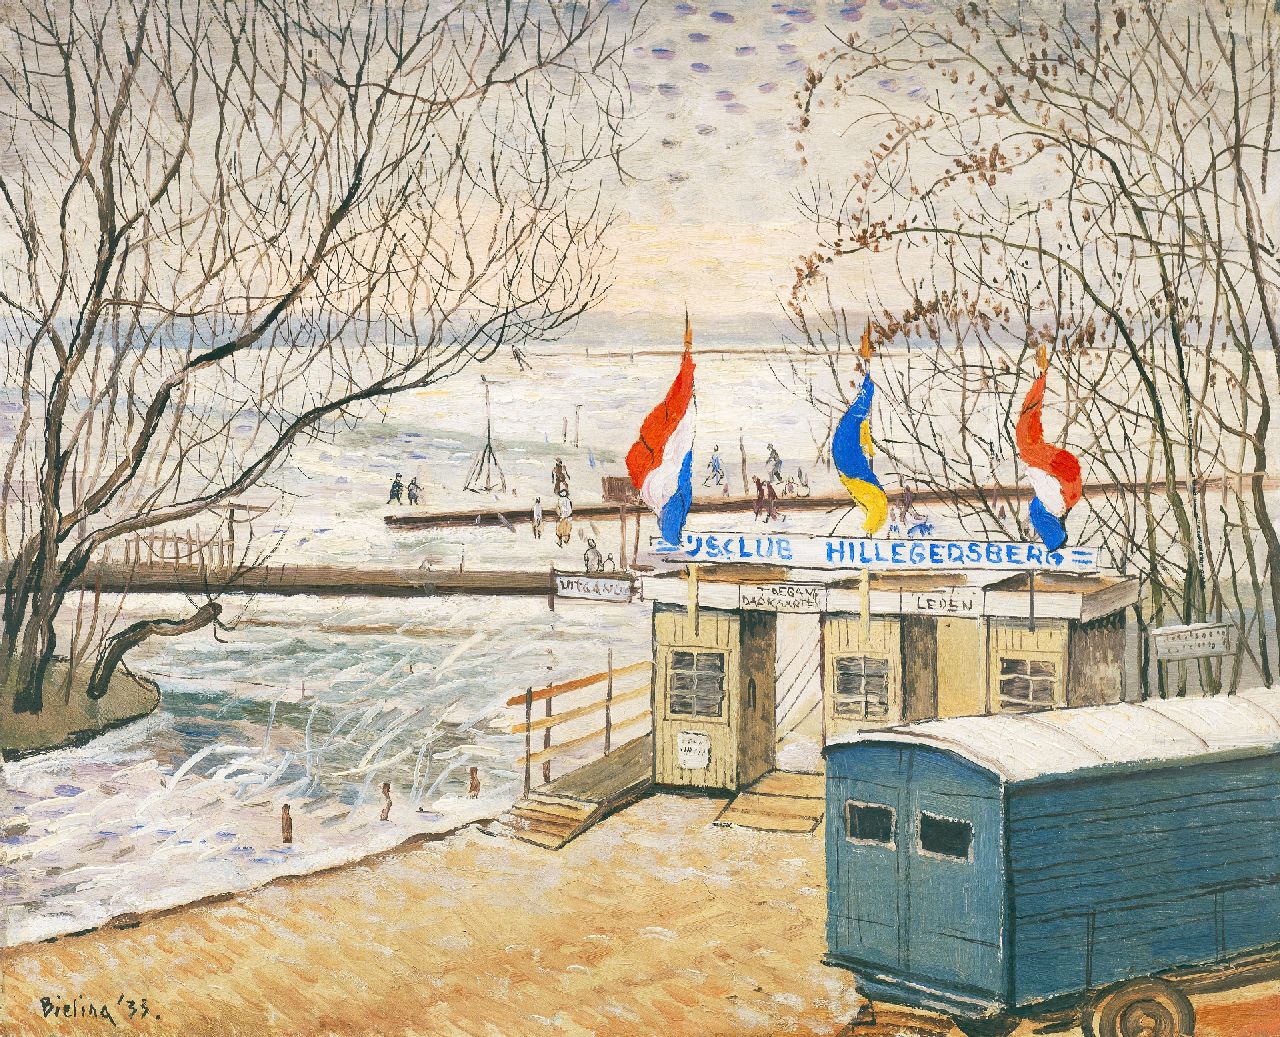 Bieling H.F.  | Hermann Friederich 'Herman' Bieling, The Ice club Hillegersberg near Rotterdam, oil on canvas 34.2 x 42.2 cm, signed l.l. and dated '33